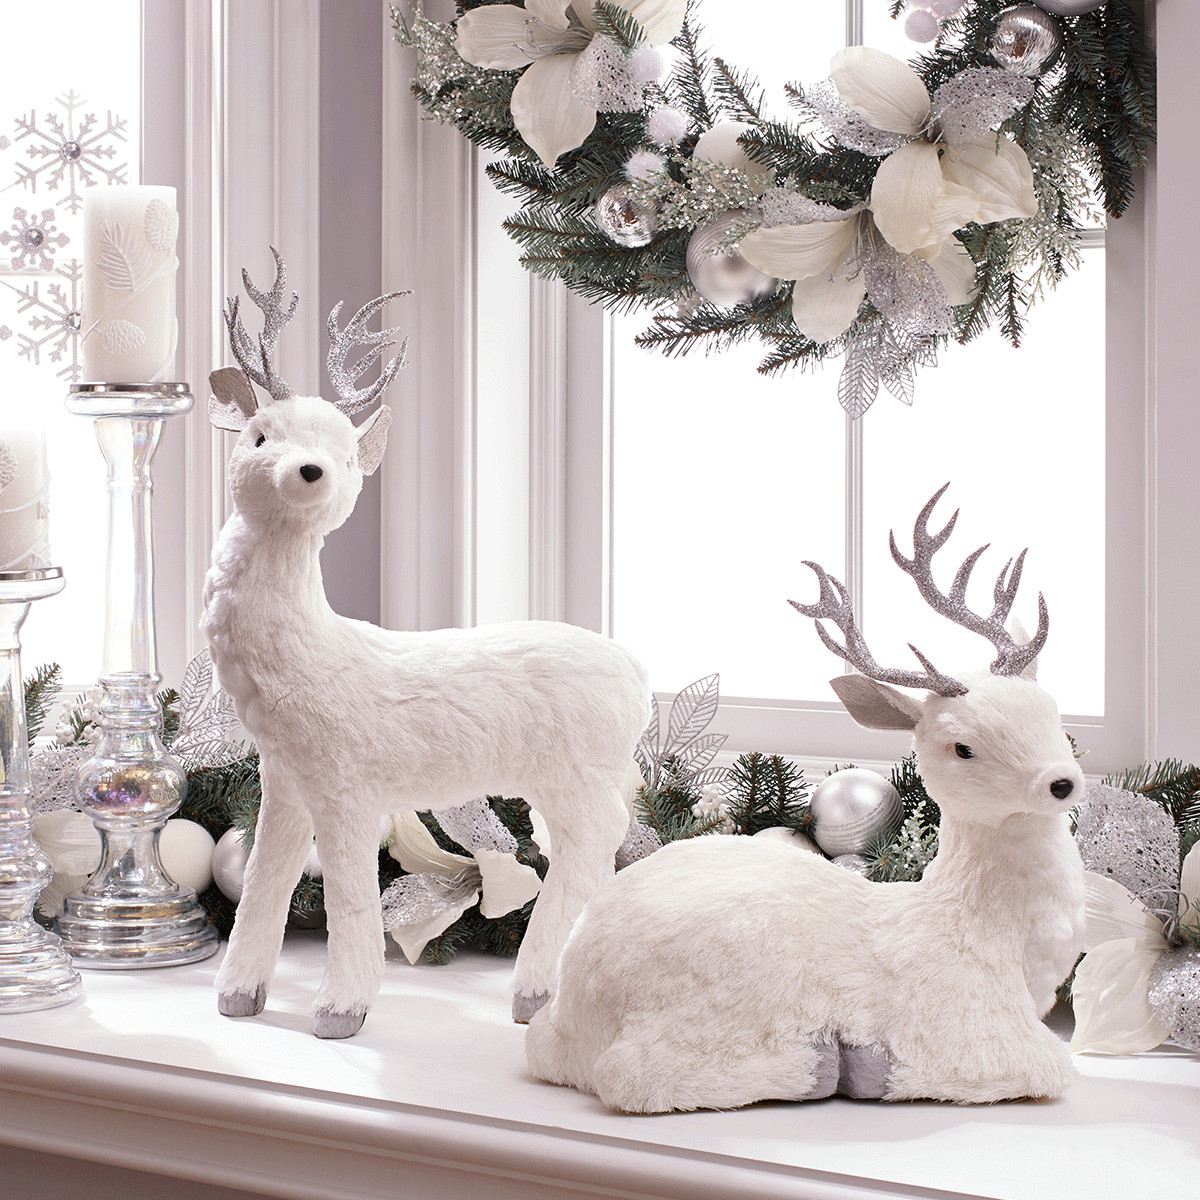 Christmas Deer Decor
 Turn your home into a winter wonderland by adding white